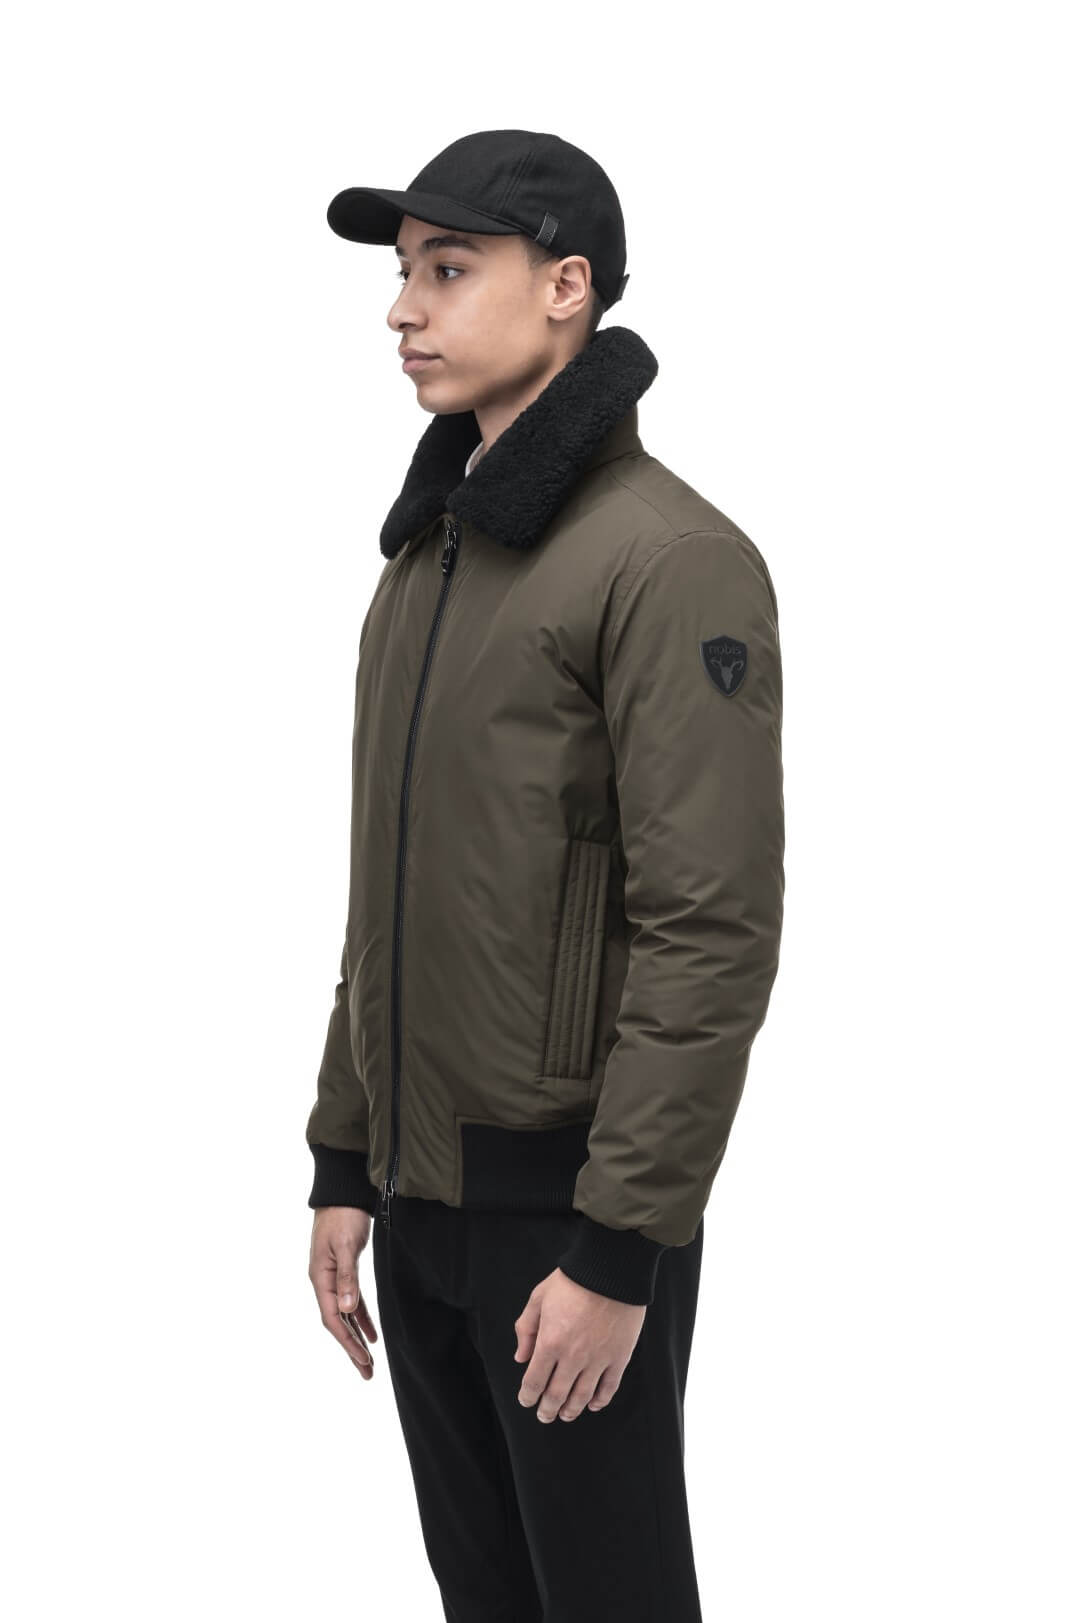 Sonar Men's Aviator Jacket in hip length, Canadian duck down insulation, removable shearling collar with hidden tuckable hood, and two-way front zipper, in Fatigue